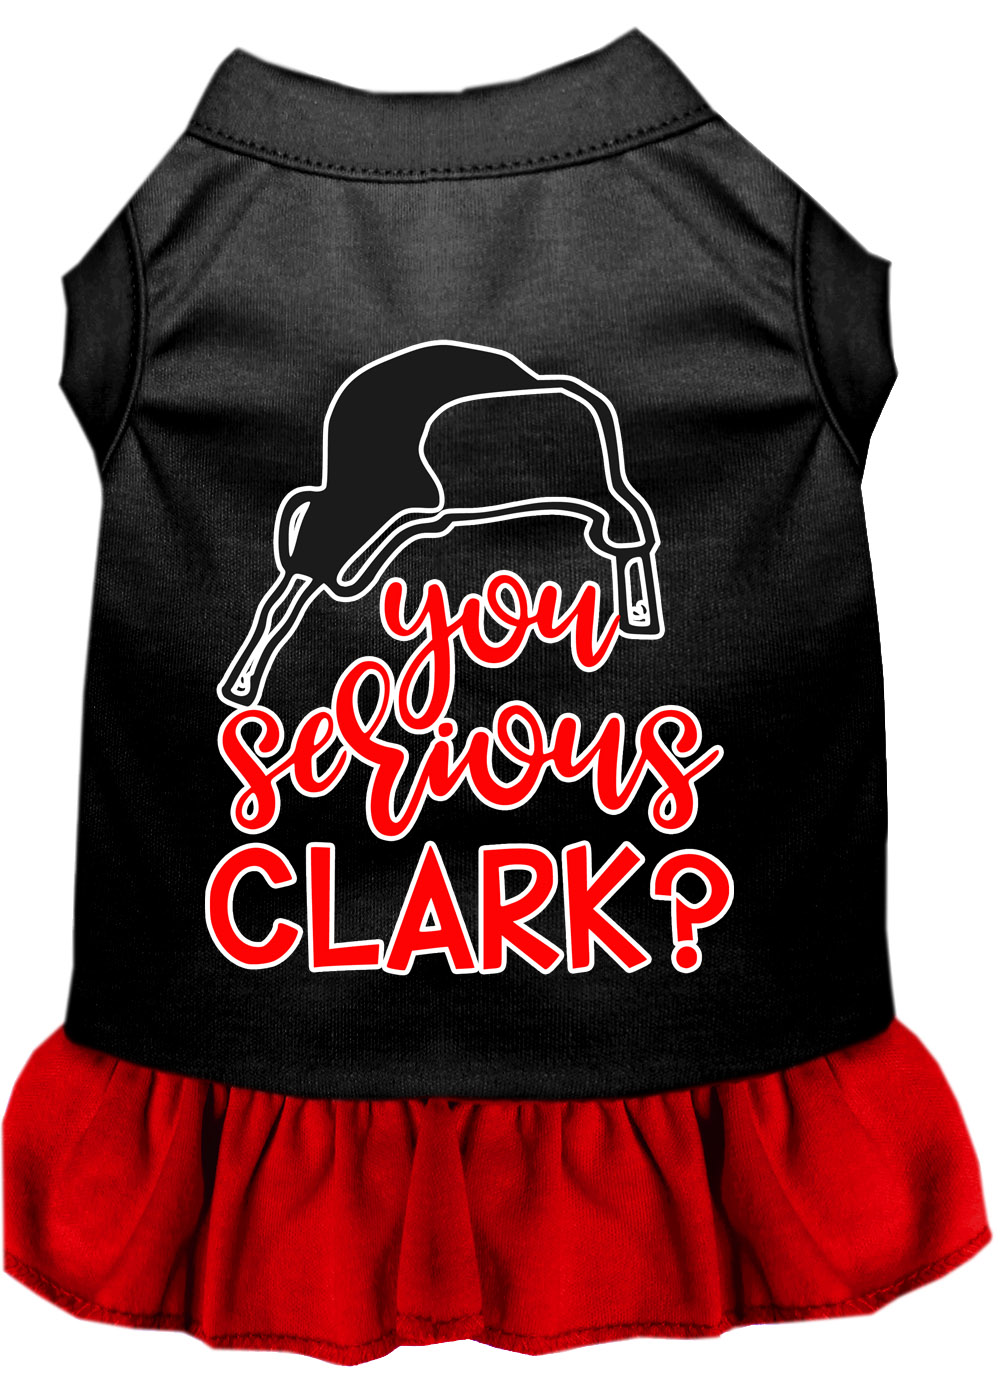 You Serious Clark? Screen Print Dog Dress Black with Red Sm